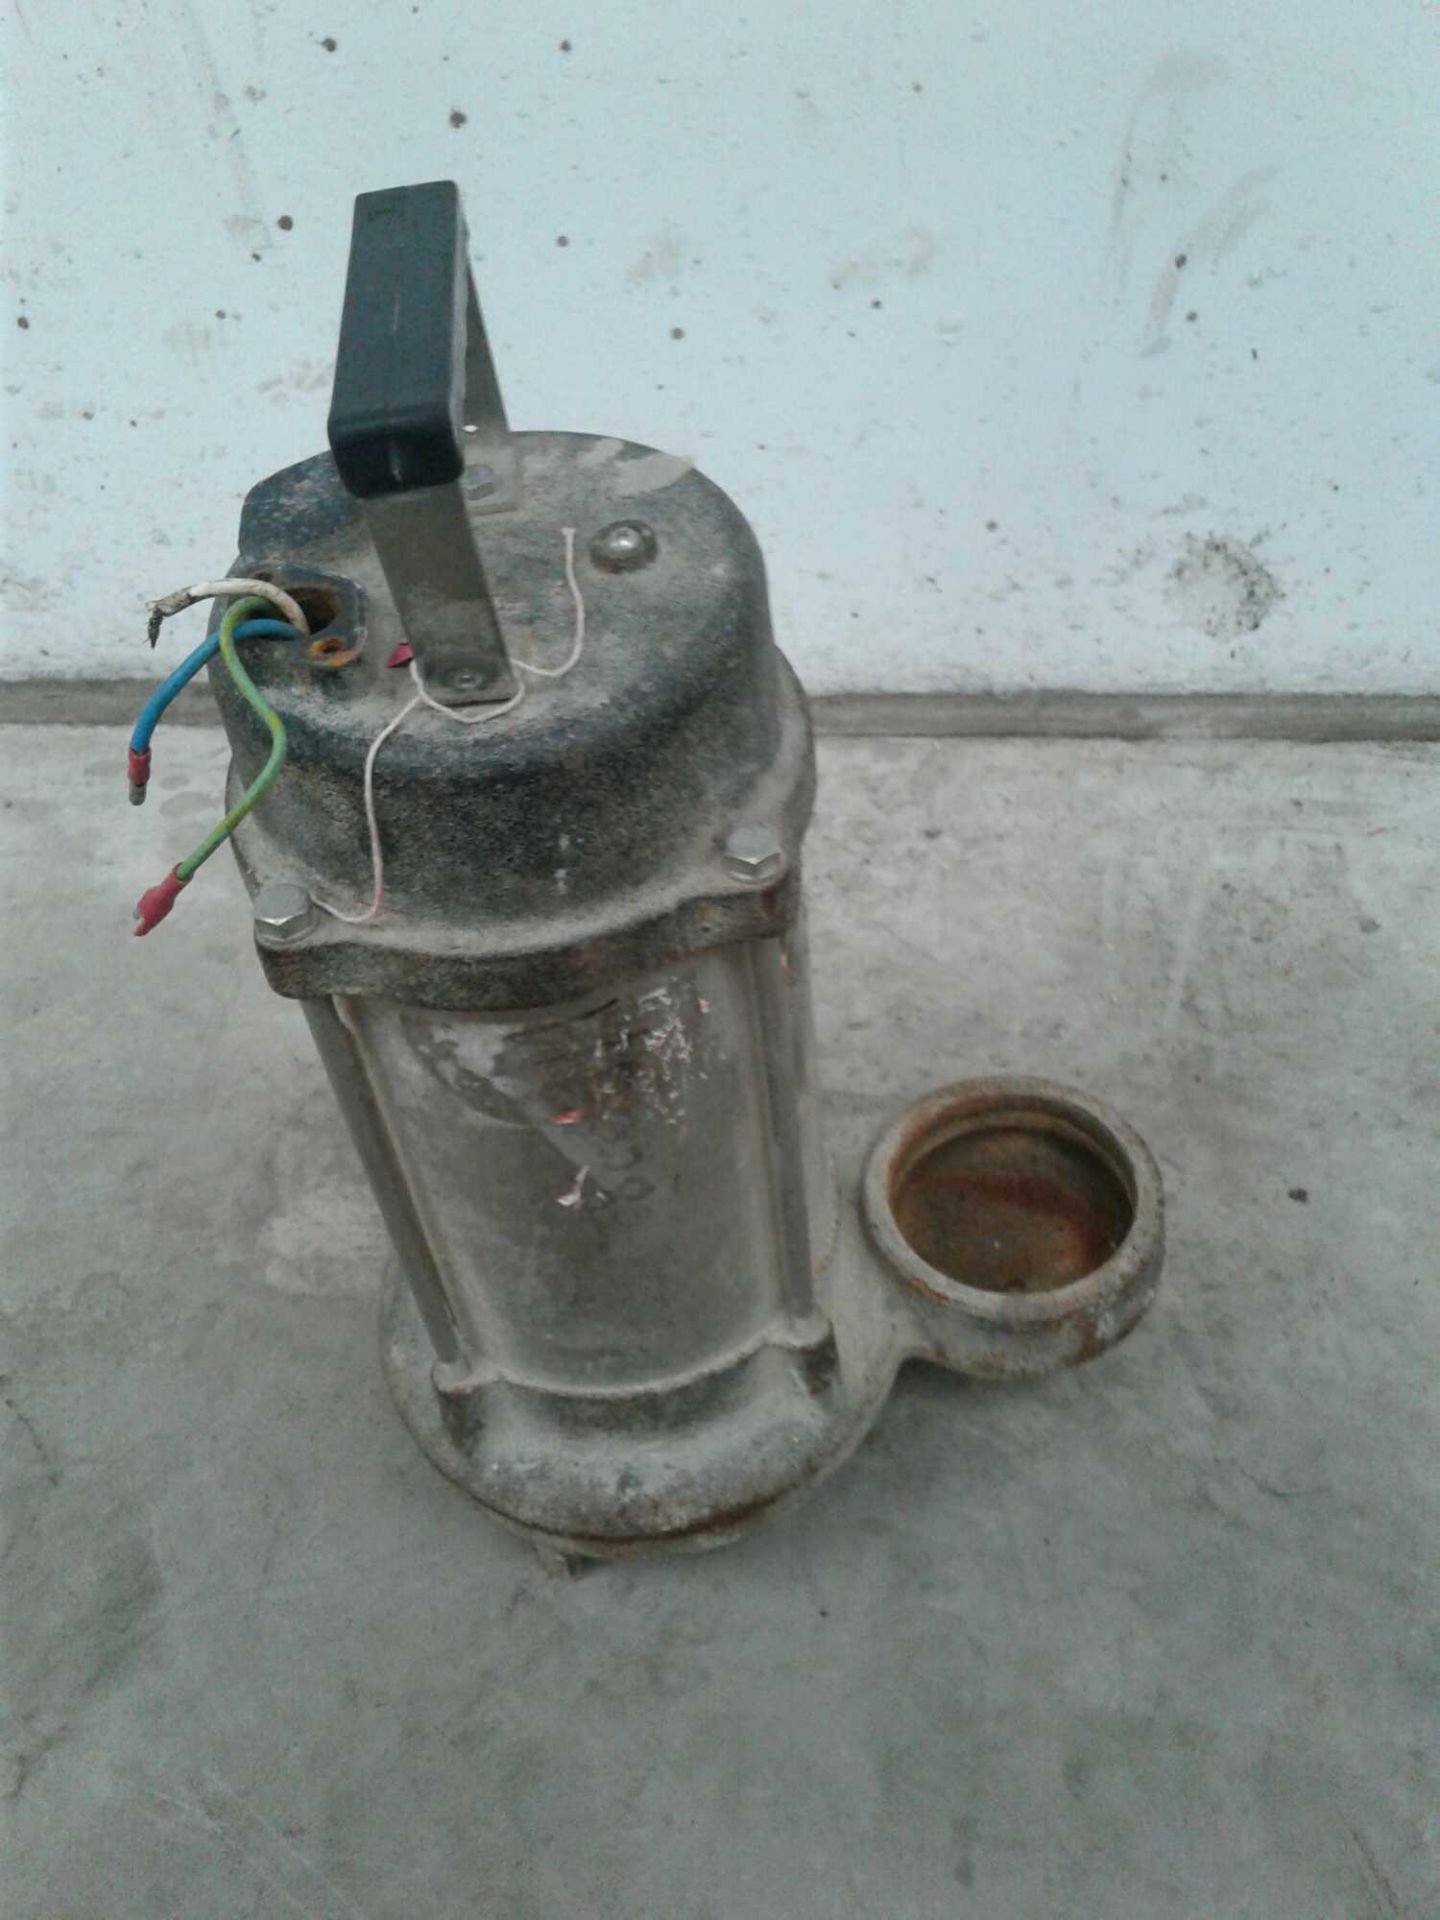 Submersible pump 110 v - Image 2 of 2